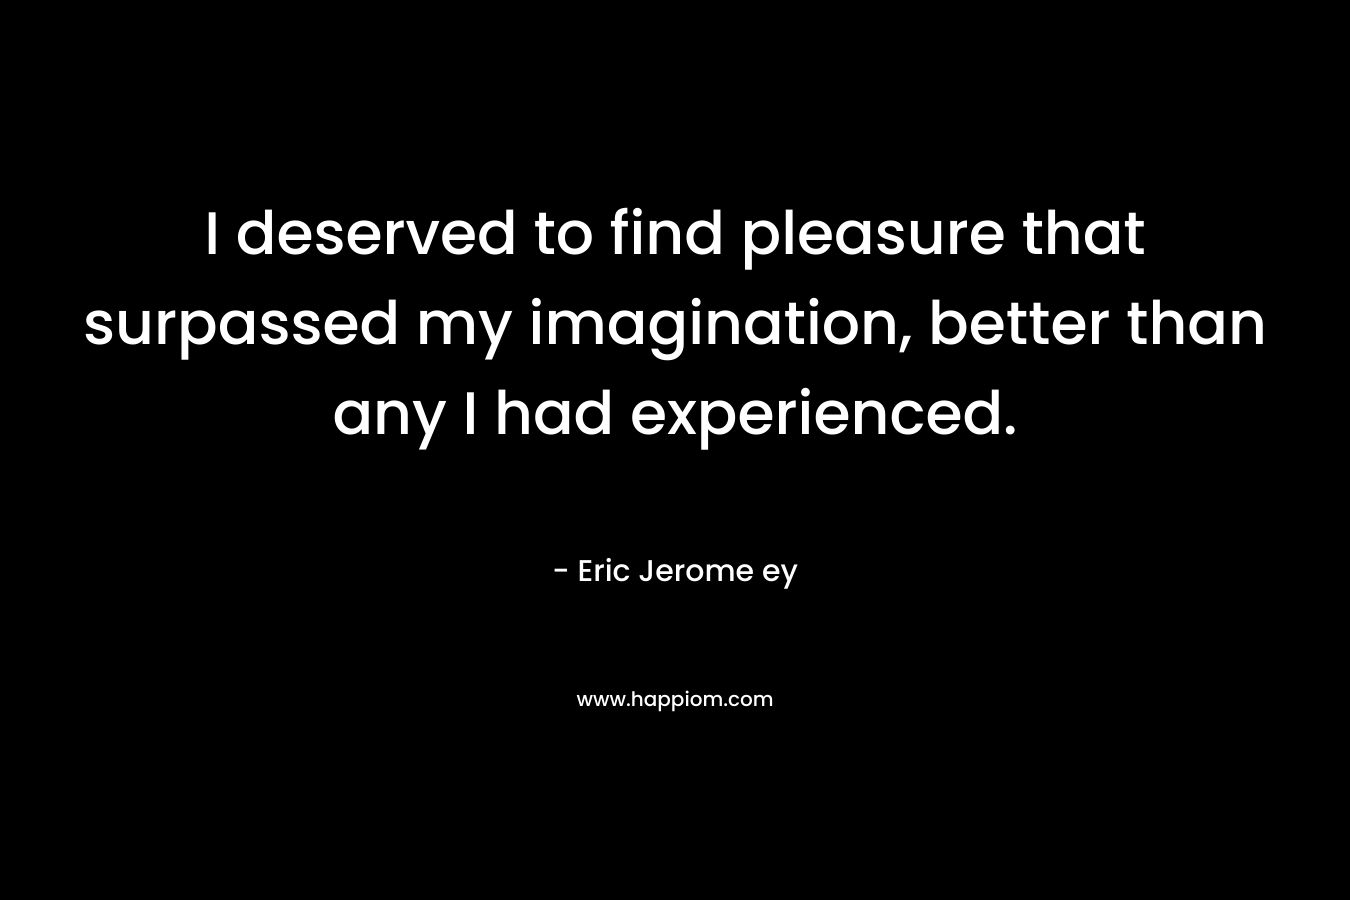 I deserved to find pleasure that surpassed my imagination, better than any I had experienced. – Eric Jerome ey